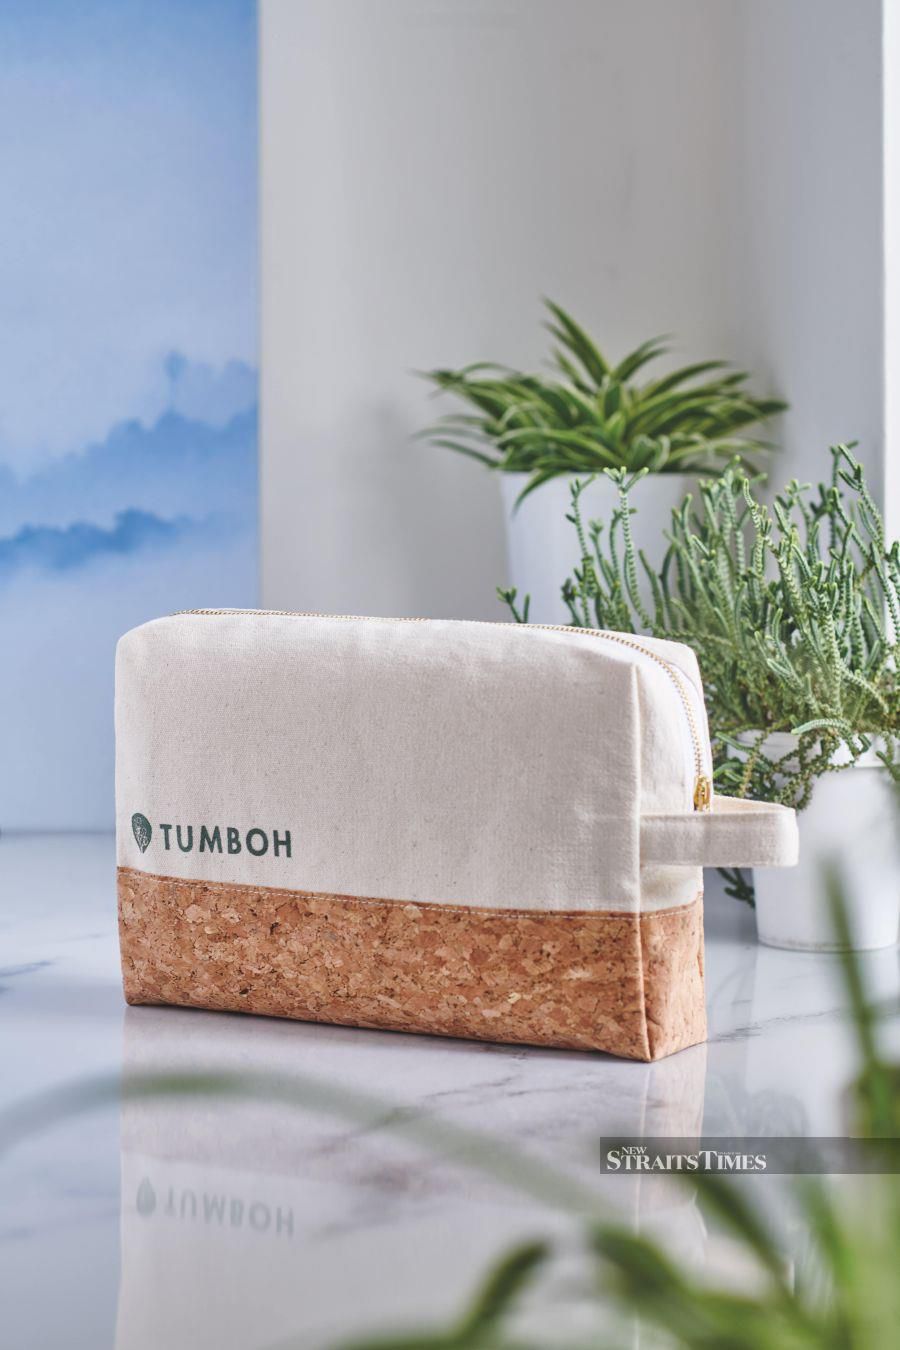  Tumboh's bag is part of their collaboration with Kommuniti Tukang Jahit (KTJ).